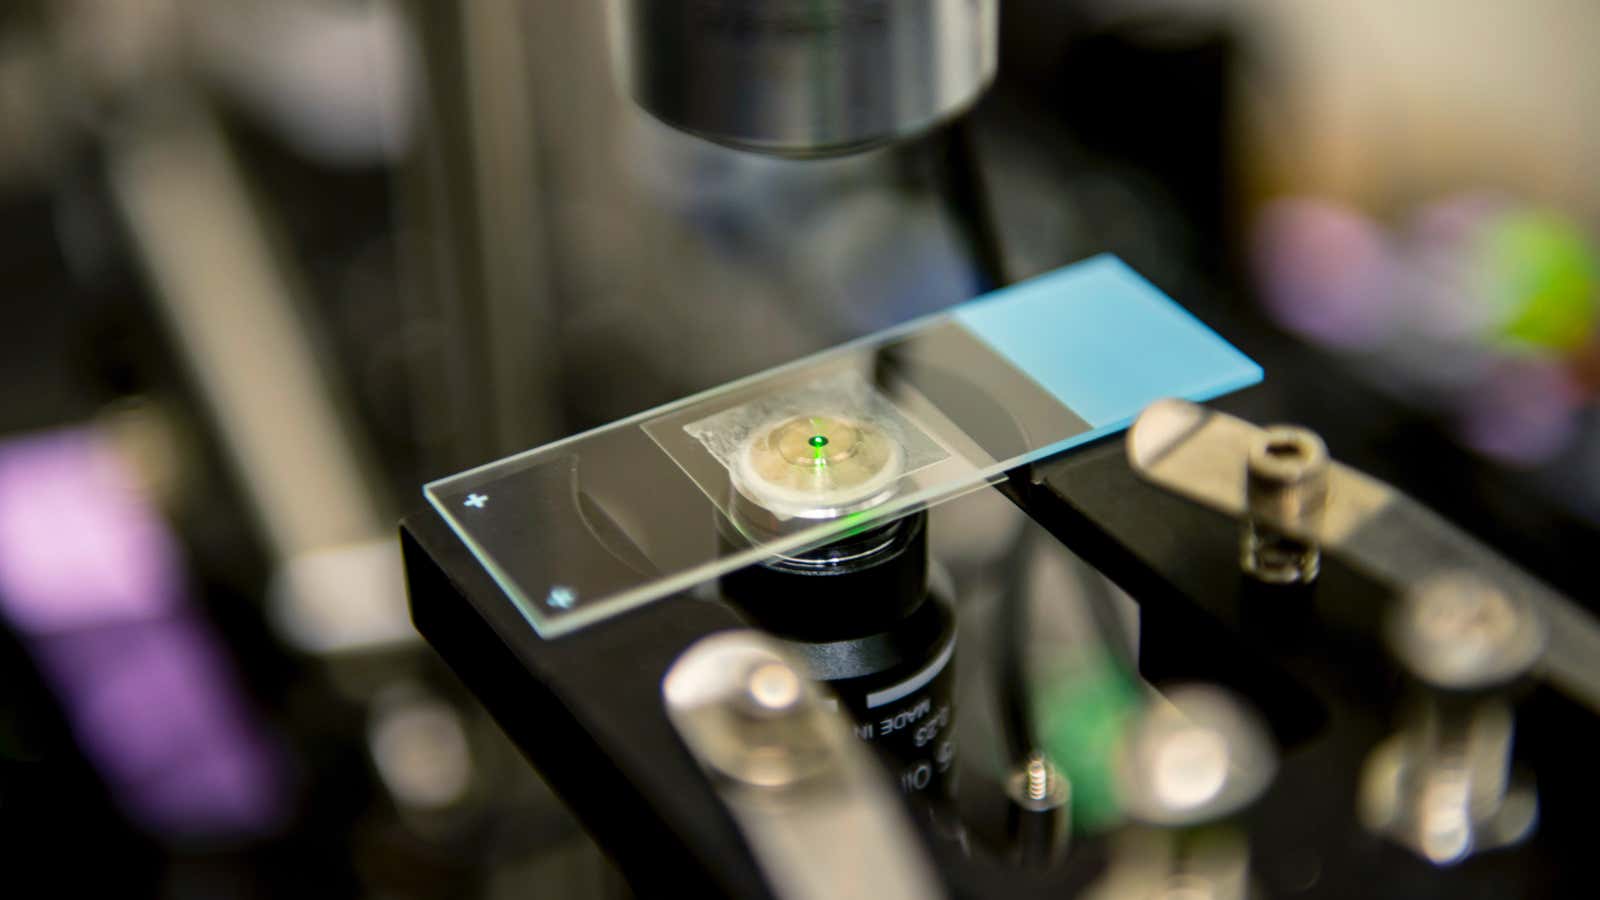 As they’re laser cooled, nanocrystals emit a reddish-green glow.